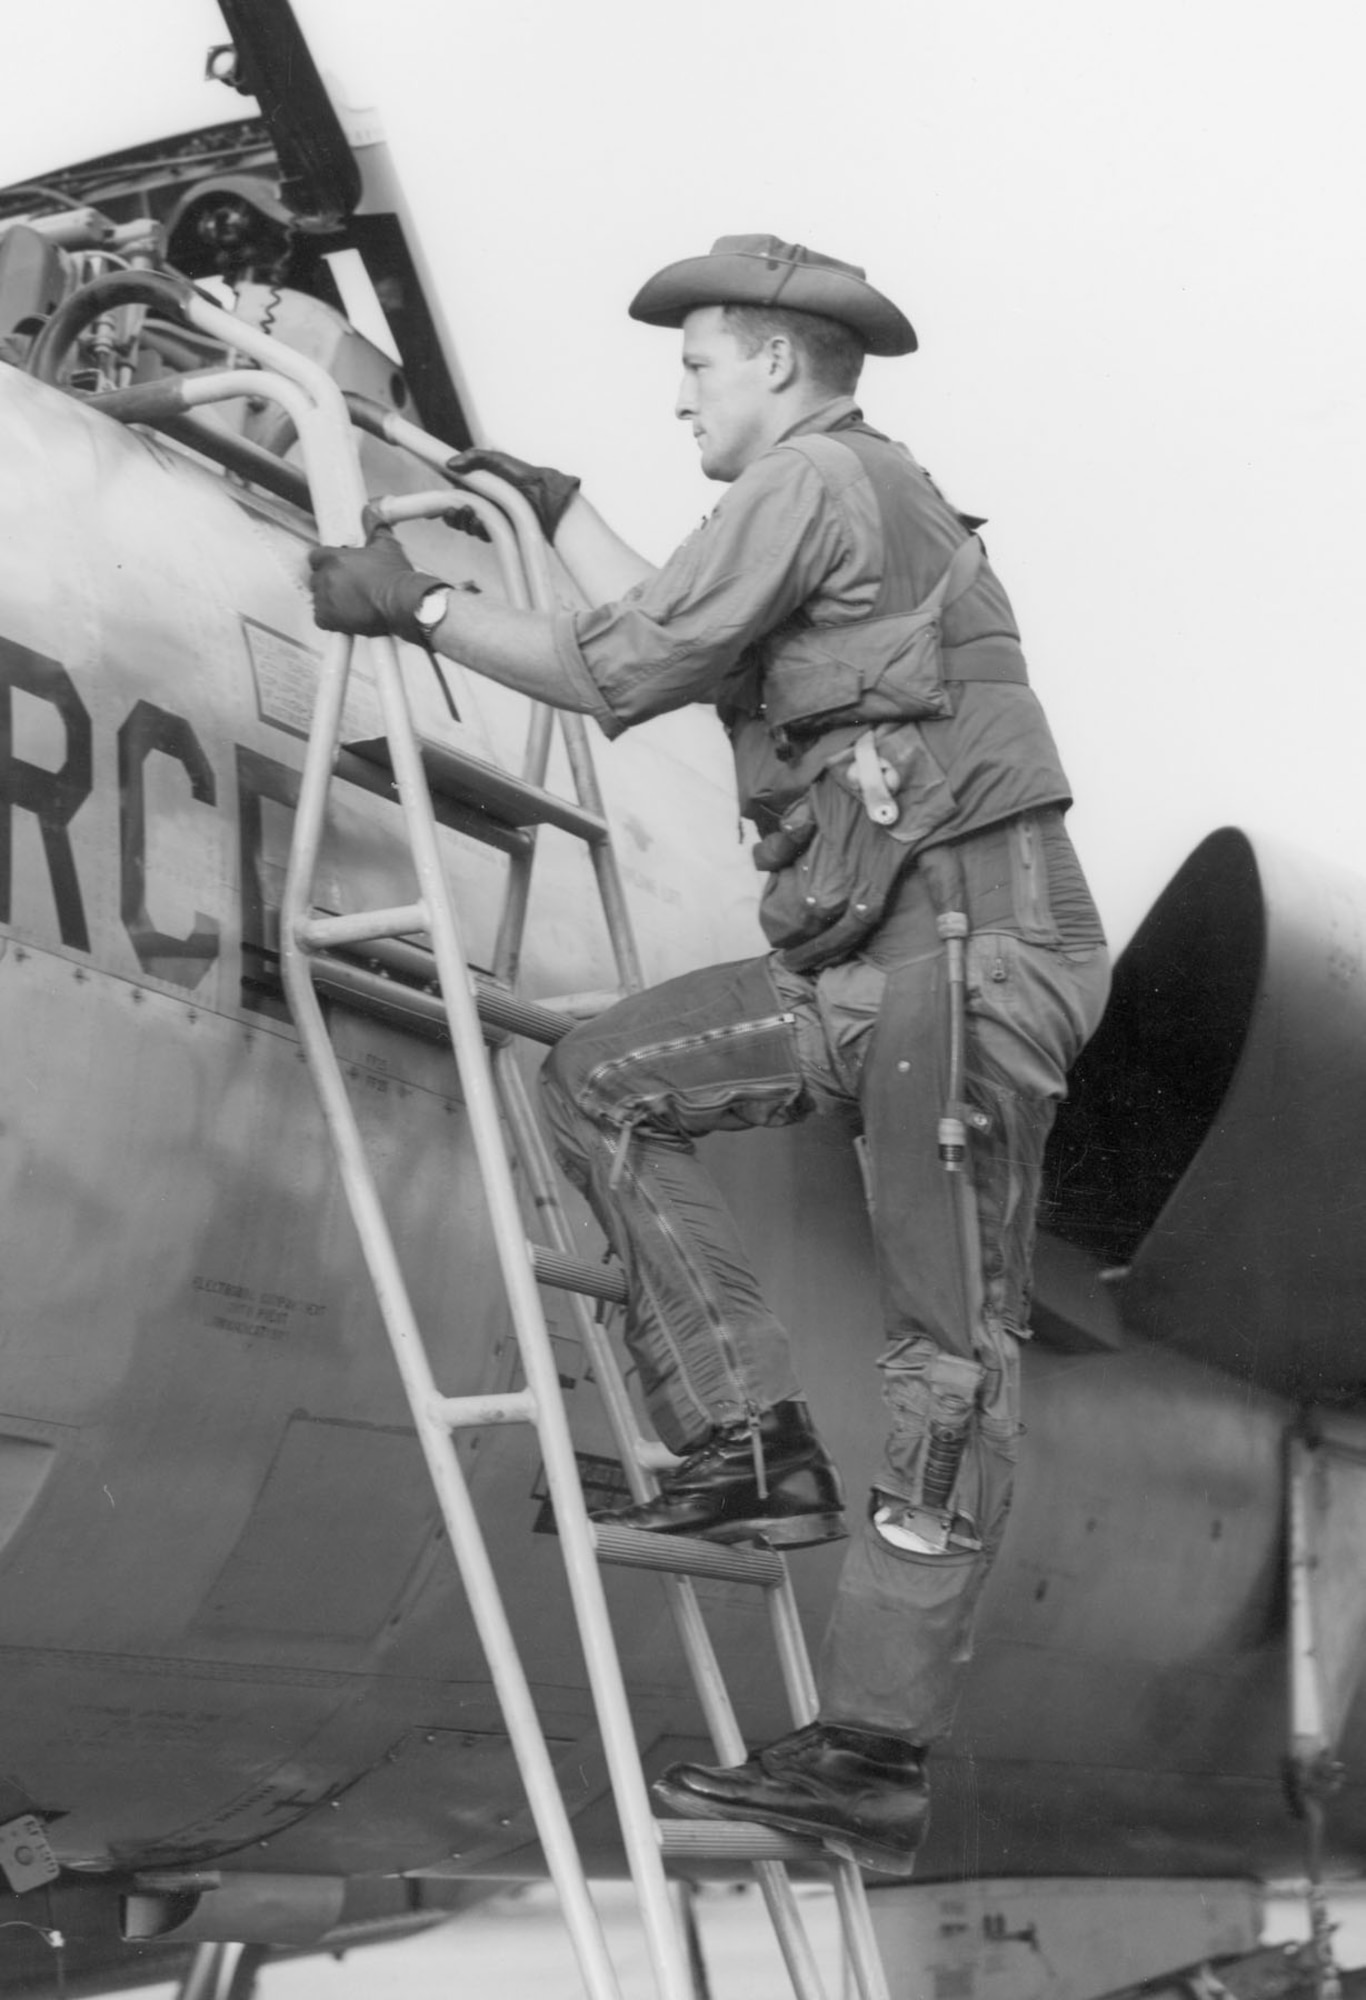 Capt. Totten pictured wearing the Sportsmatic watch and knife (the knife is in his left lower leg pocket). He carried both of these items on his 100 mission tour. (U.S. Air Force photo)